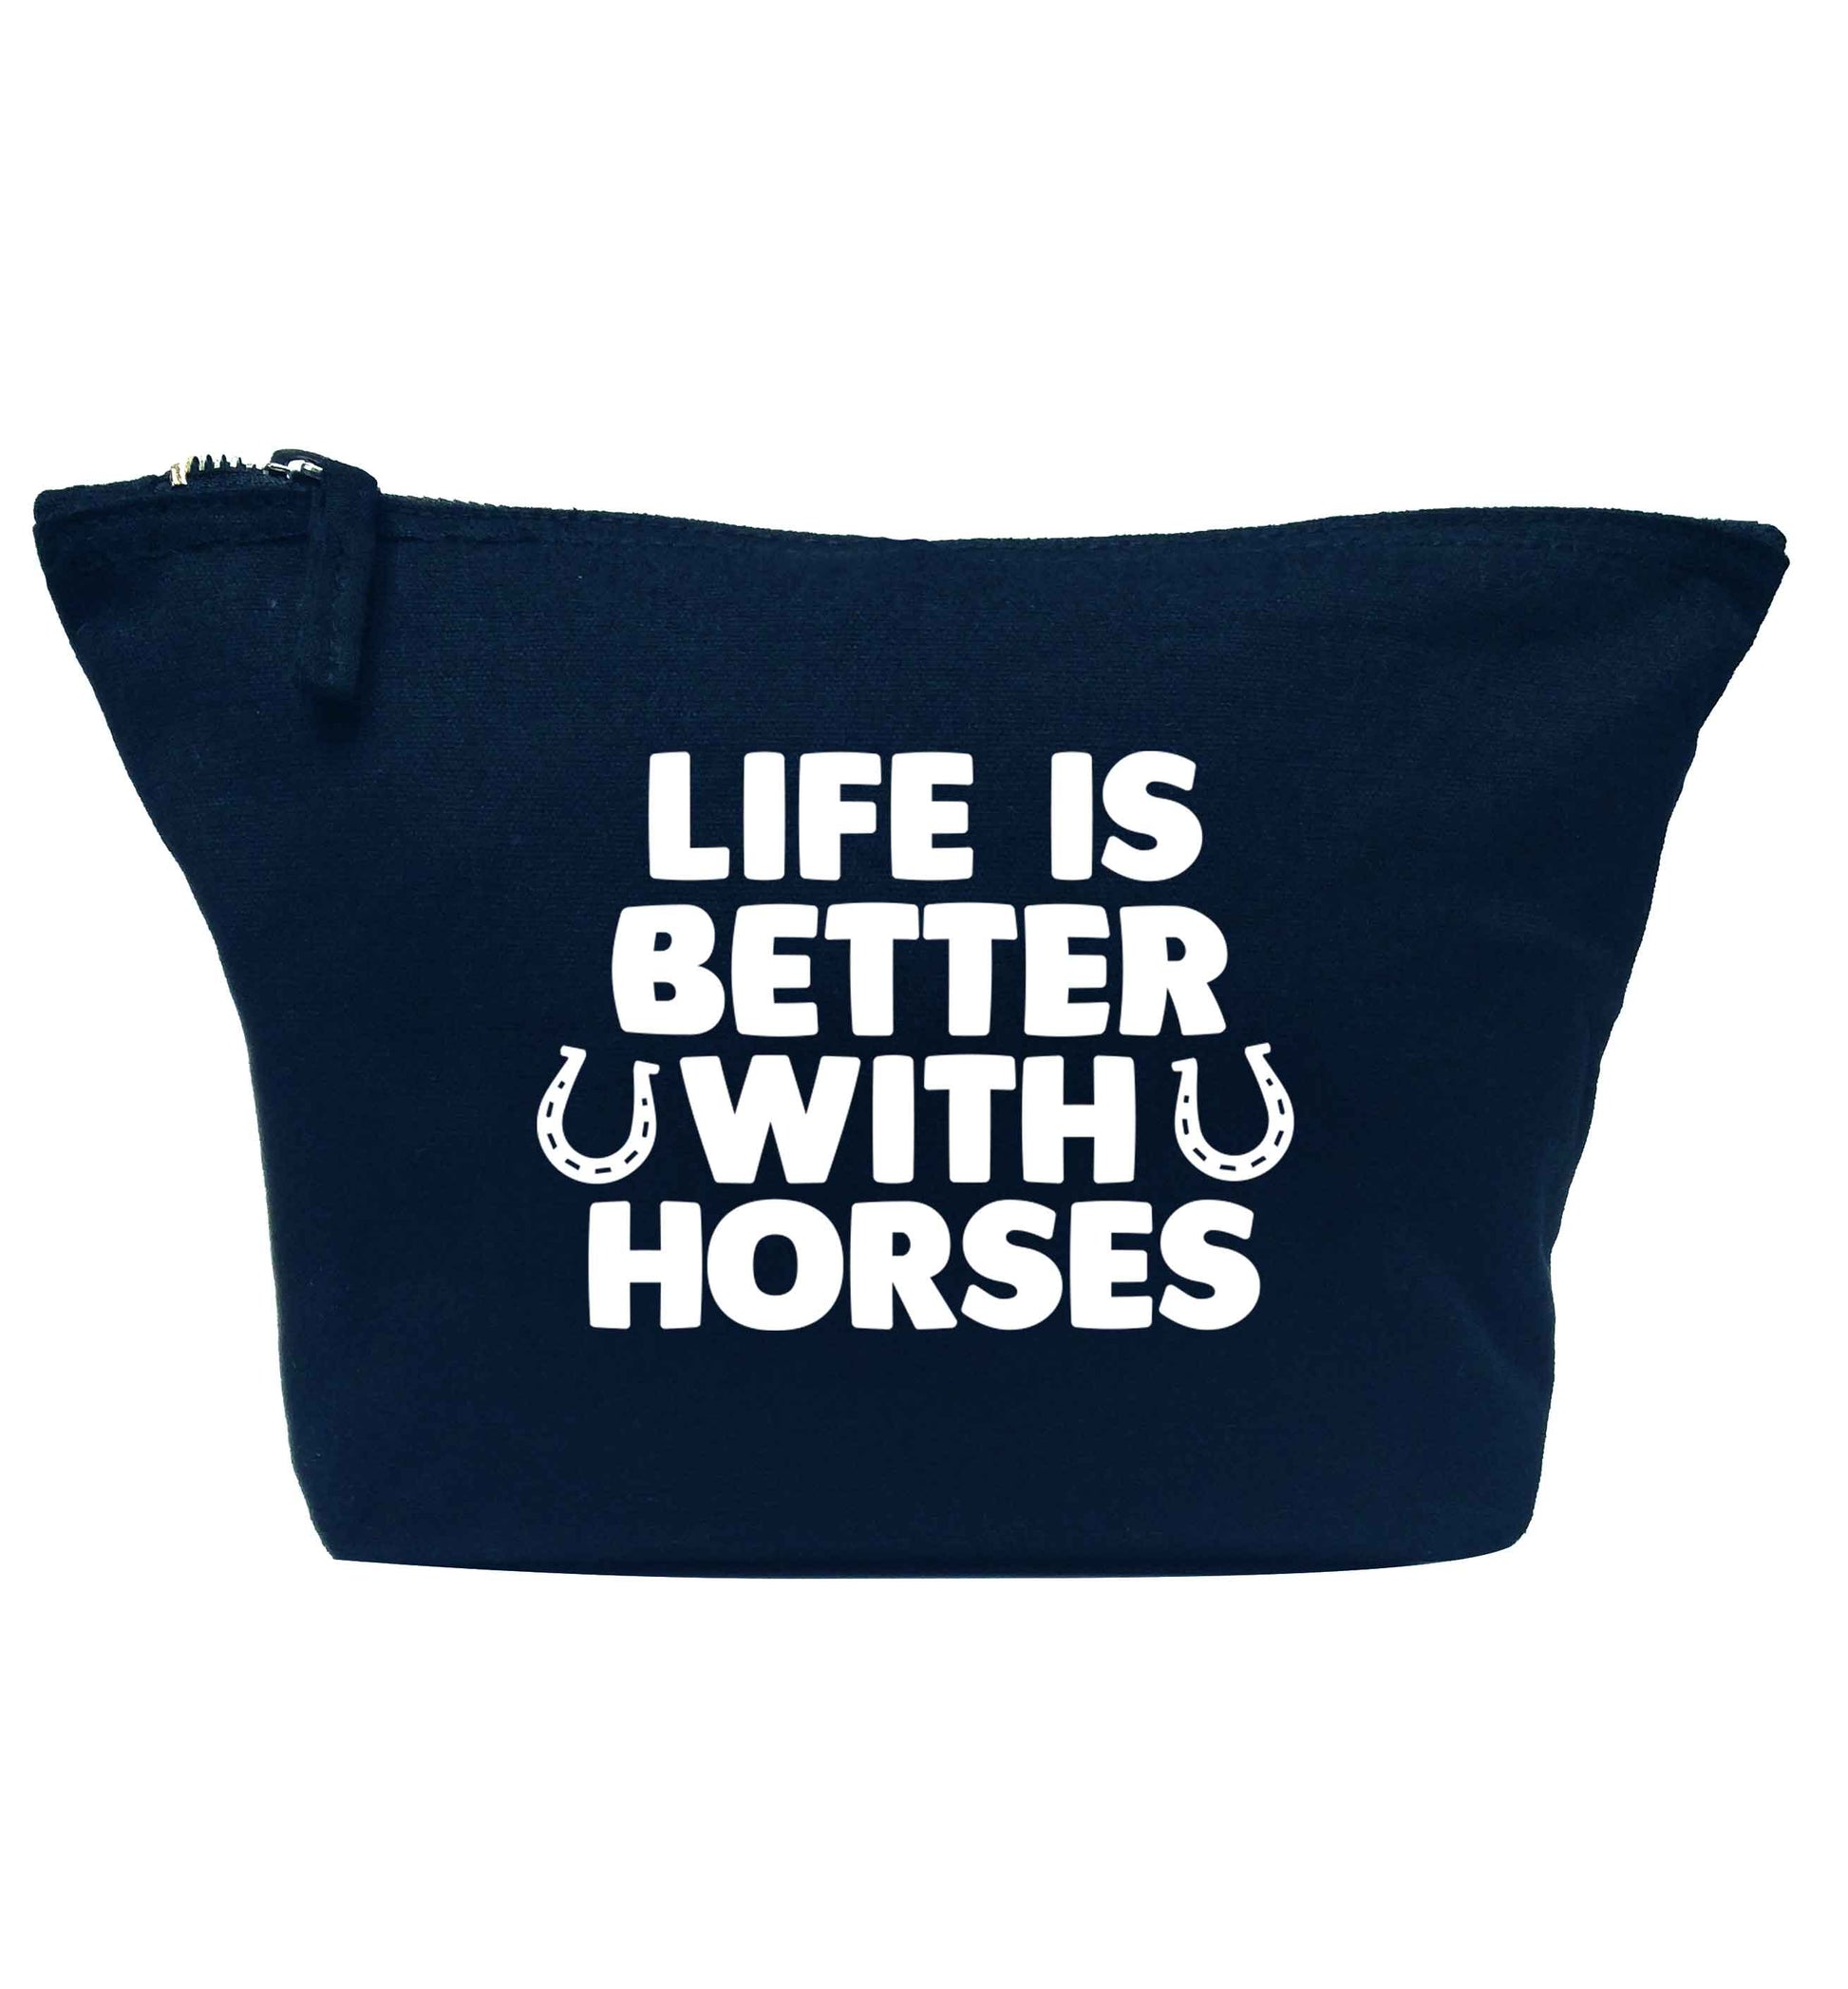 Life is better with horses navy makeup bag